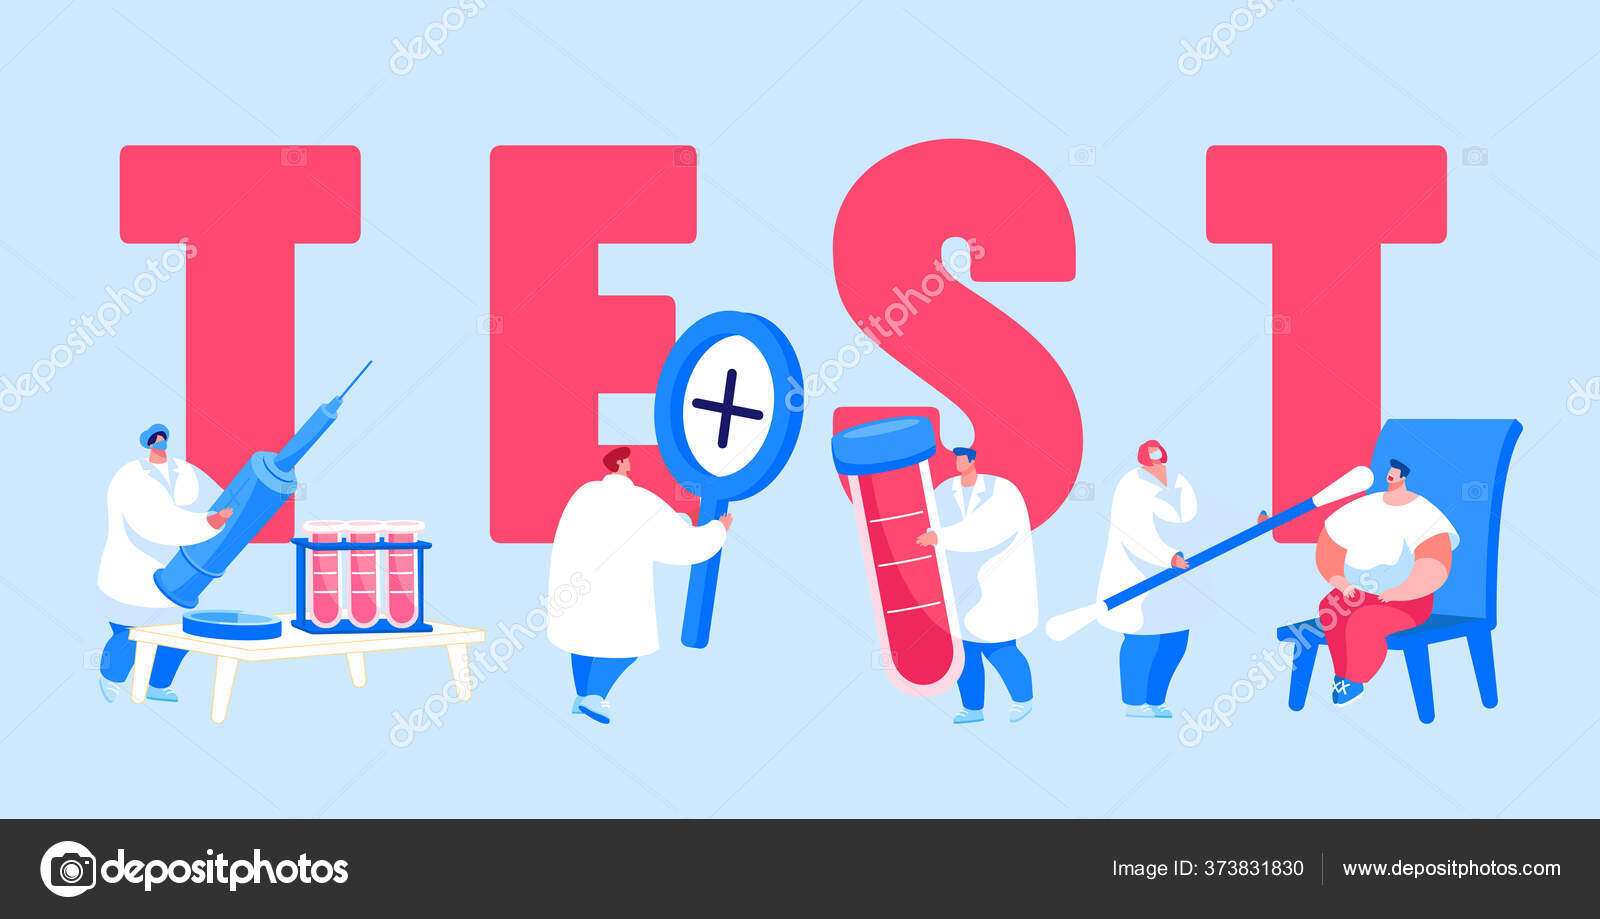 Disease　©woodhouse　People　Dna,　Express　Laboratory　Blood　and　Aids,　Characters　with　Test　in　Vector　Concept.　for　Flasks　Flyer.　Tiny　Patients　Doctors　Cartoon　Poster　Glass　Vector　Diagnostics　Covid　by　19　Banner　Illustration　Stock